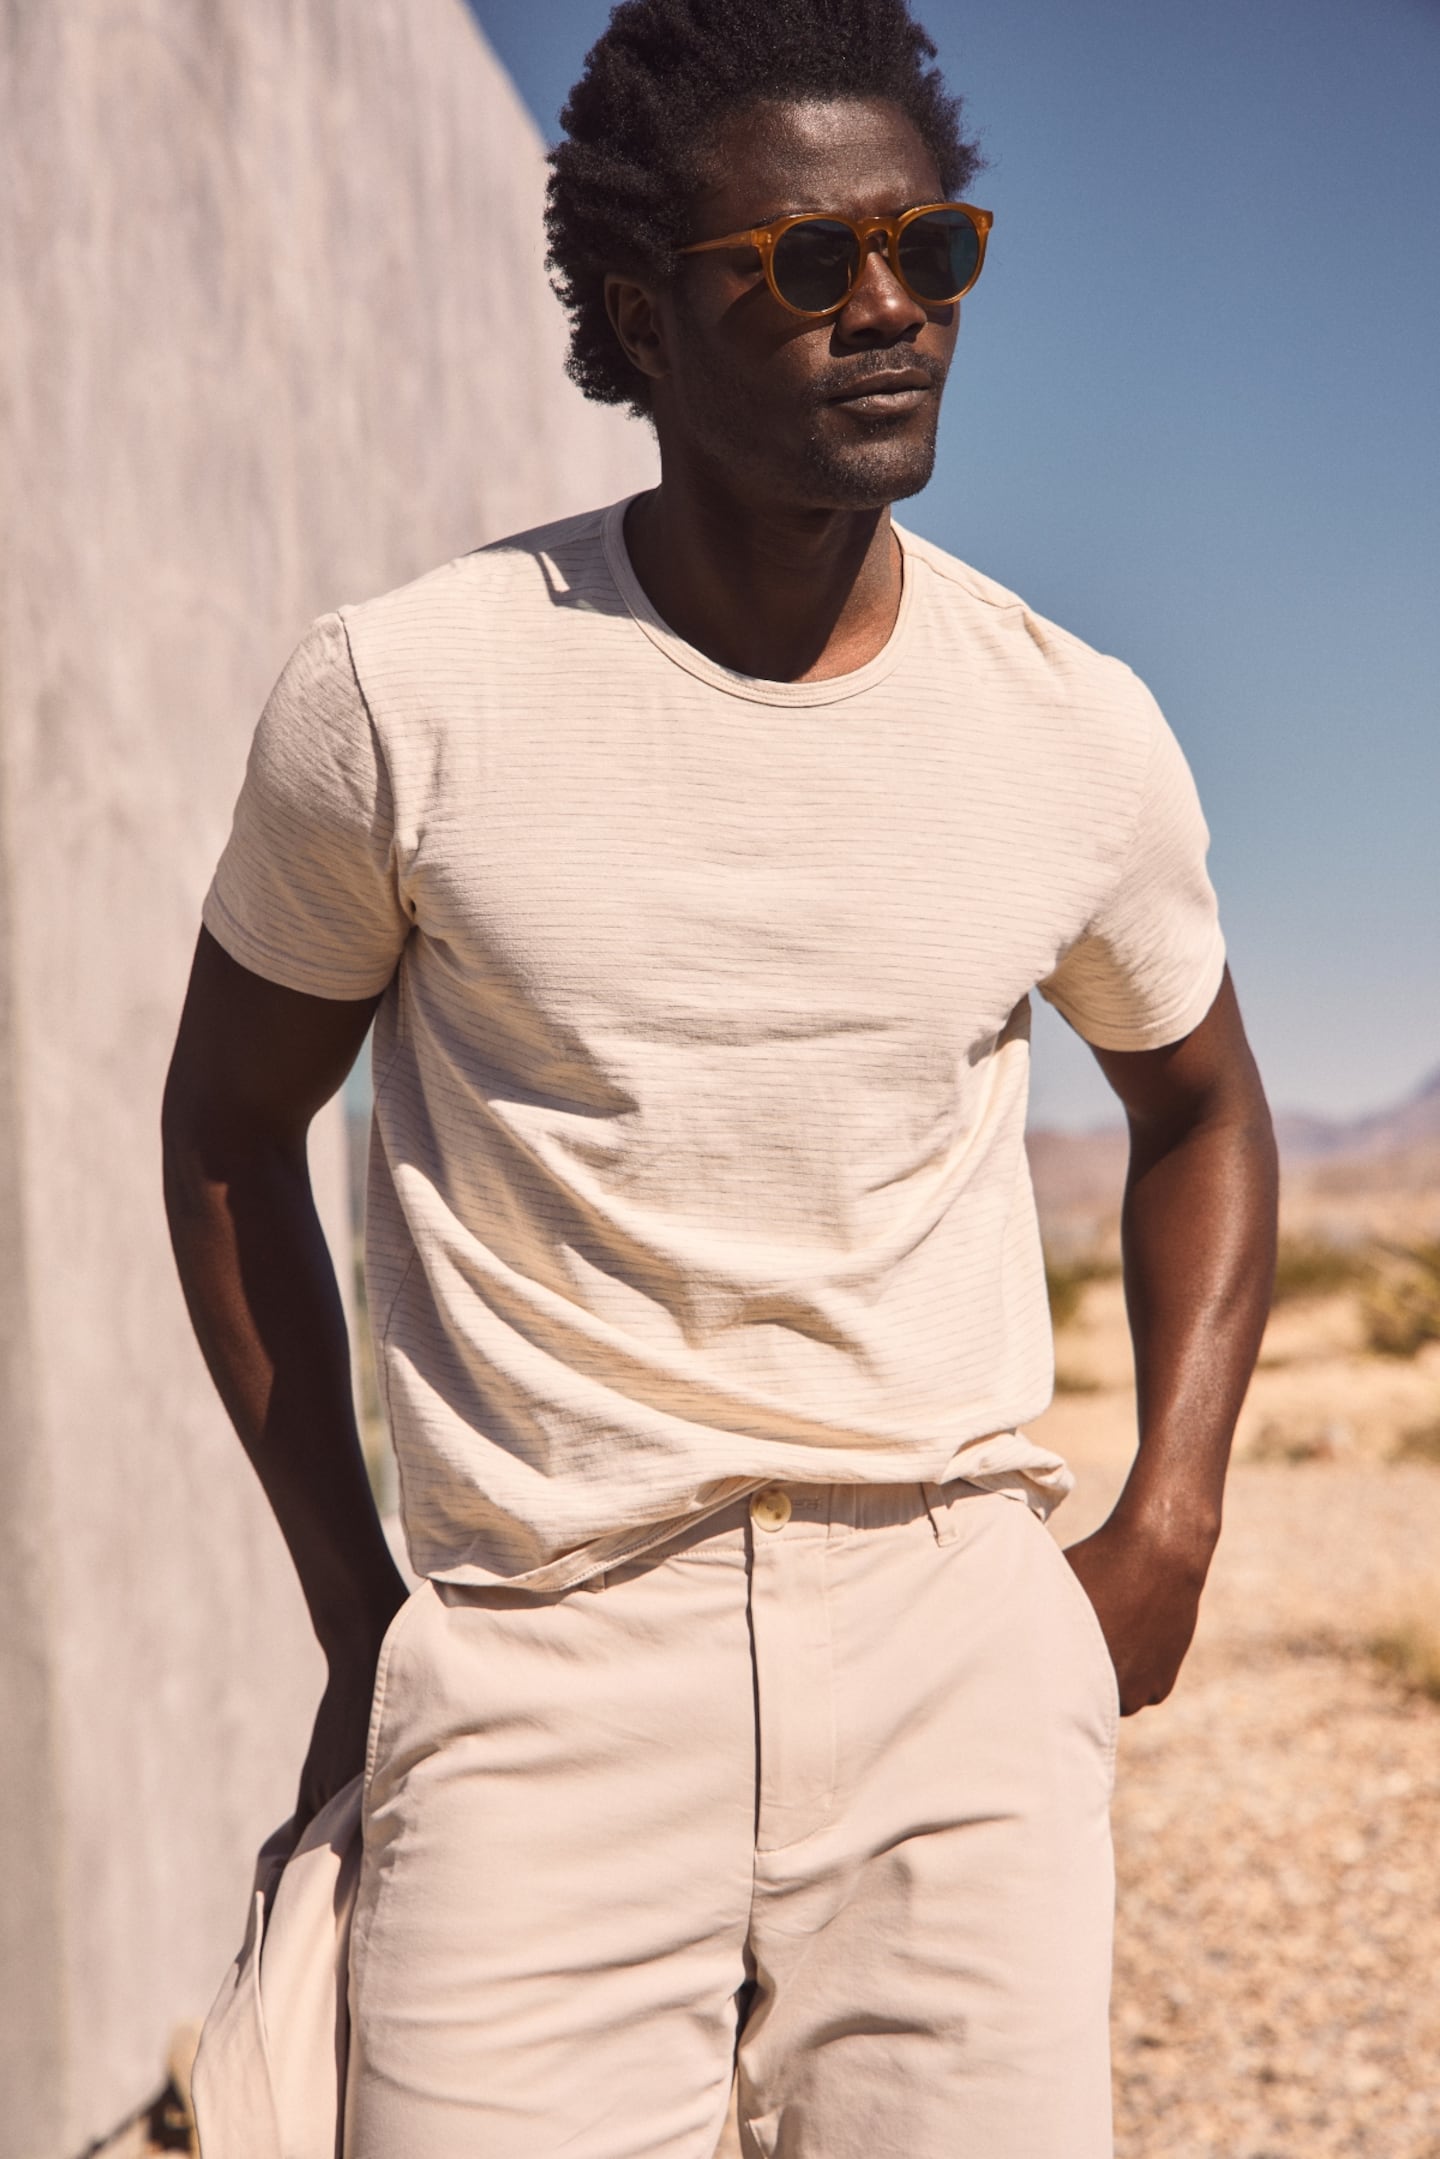 A marketing image of Marine Layer's tailored crew neck tees.